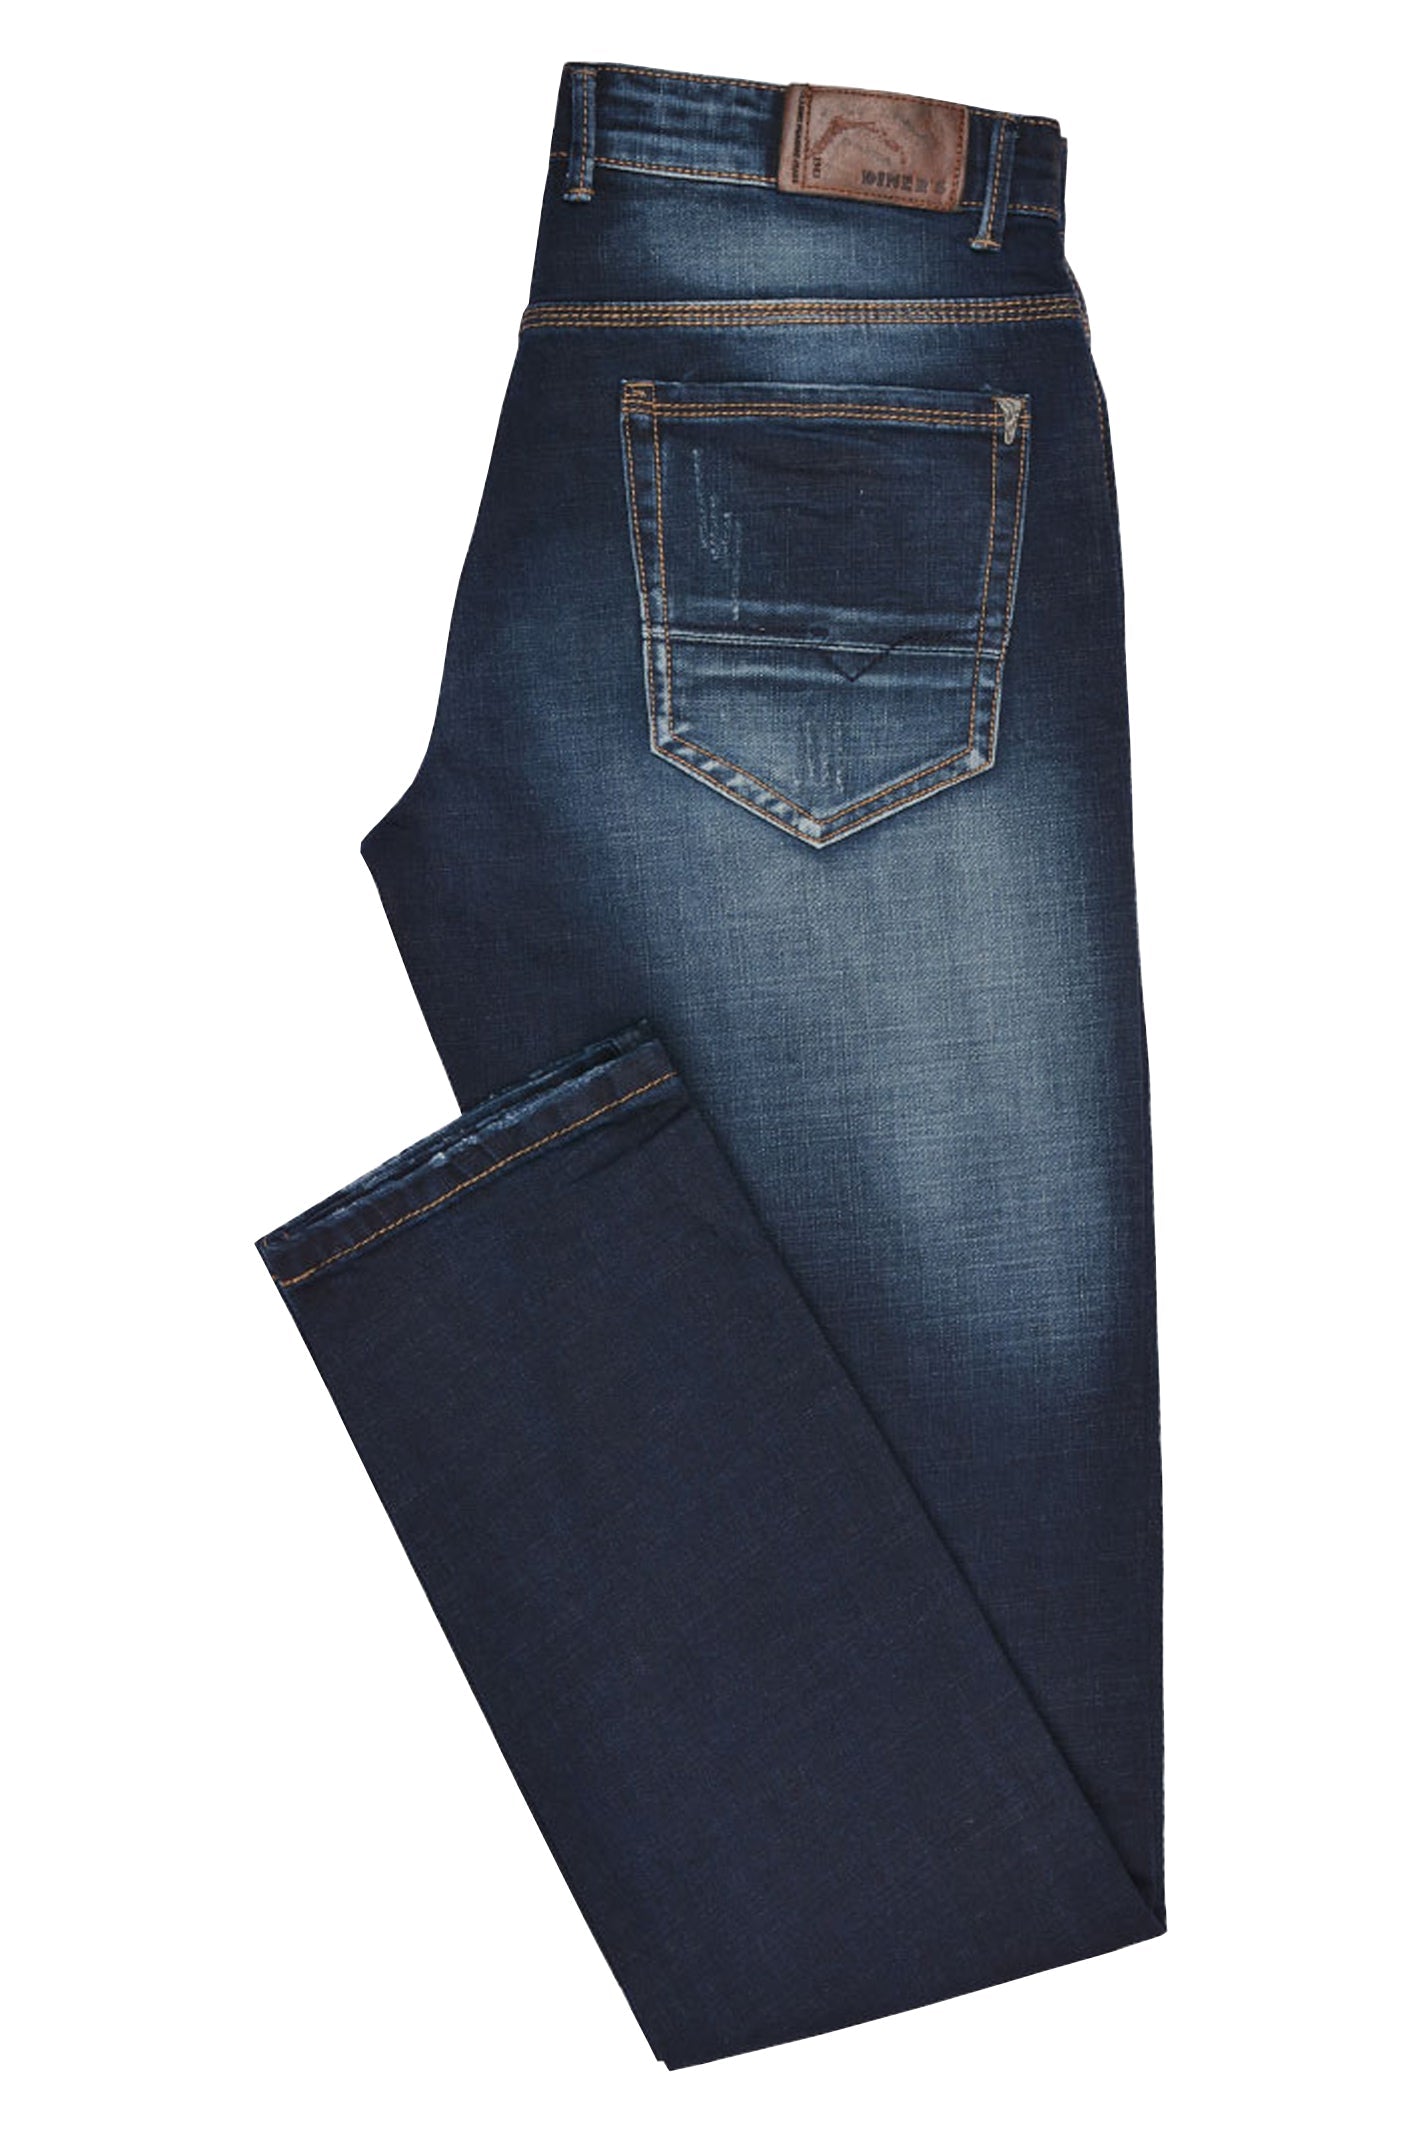 Casual Jeans in Blue SKU: BJ2720-D-BLUE - Diners